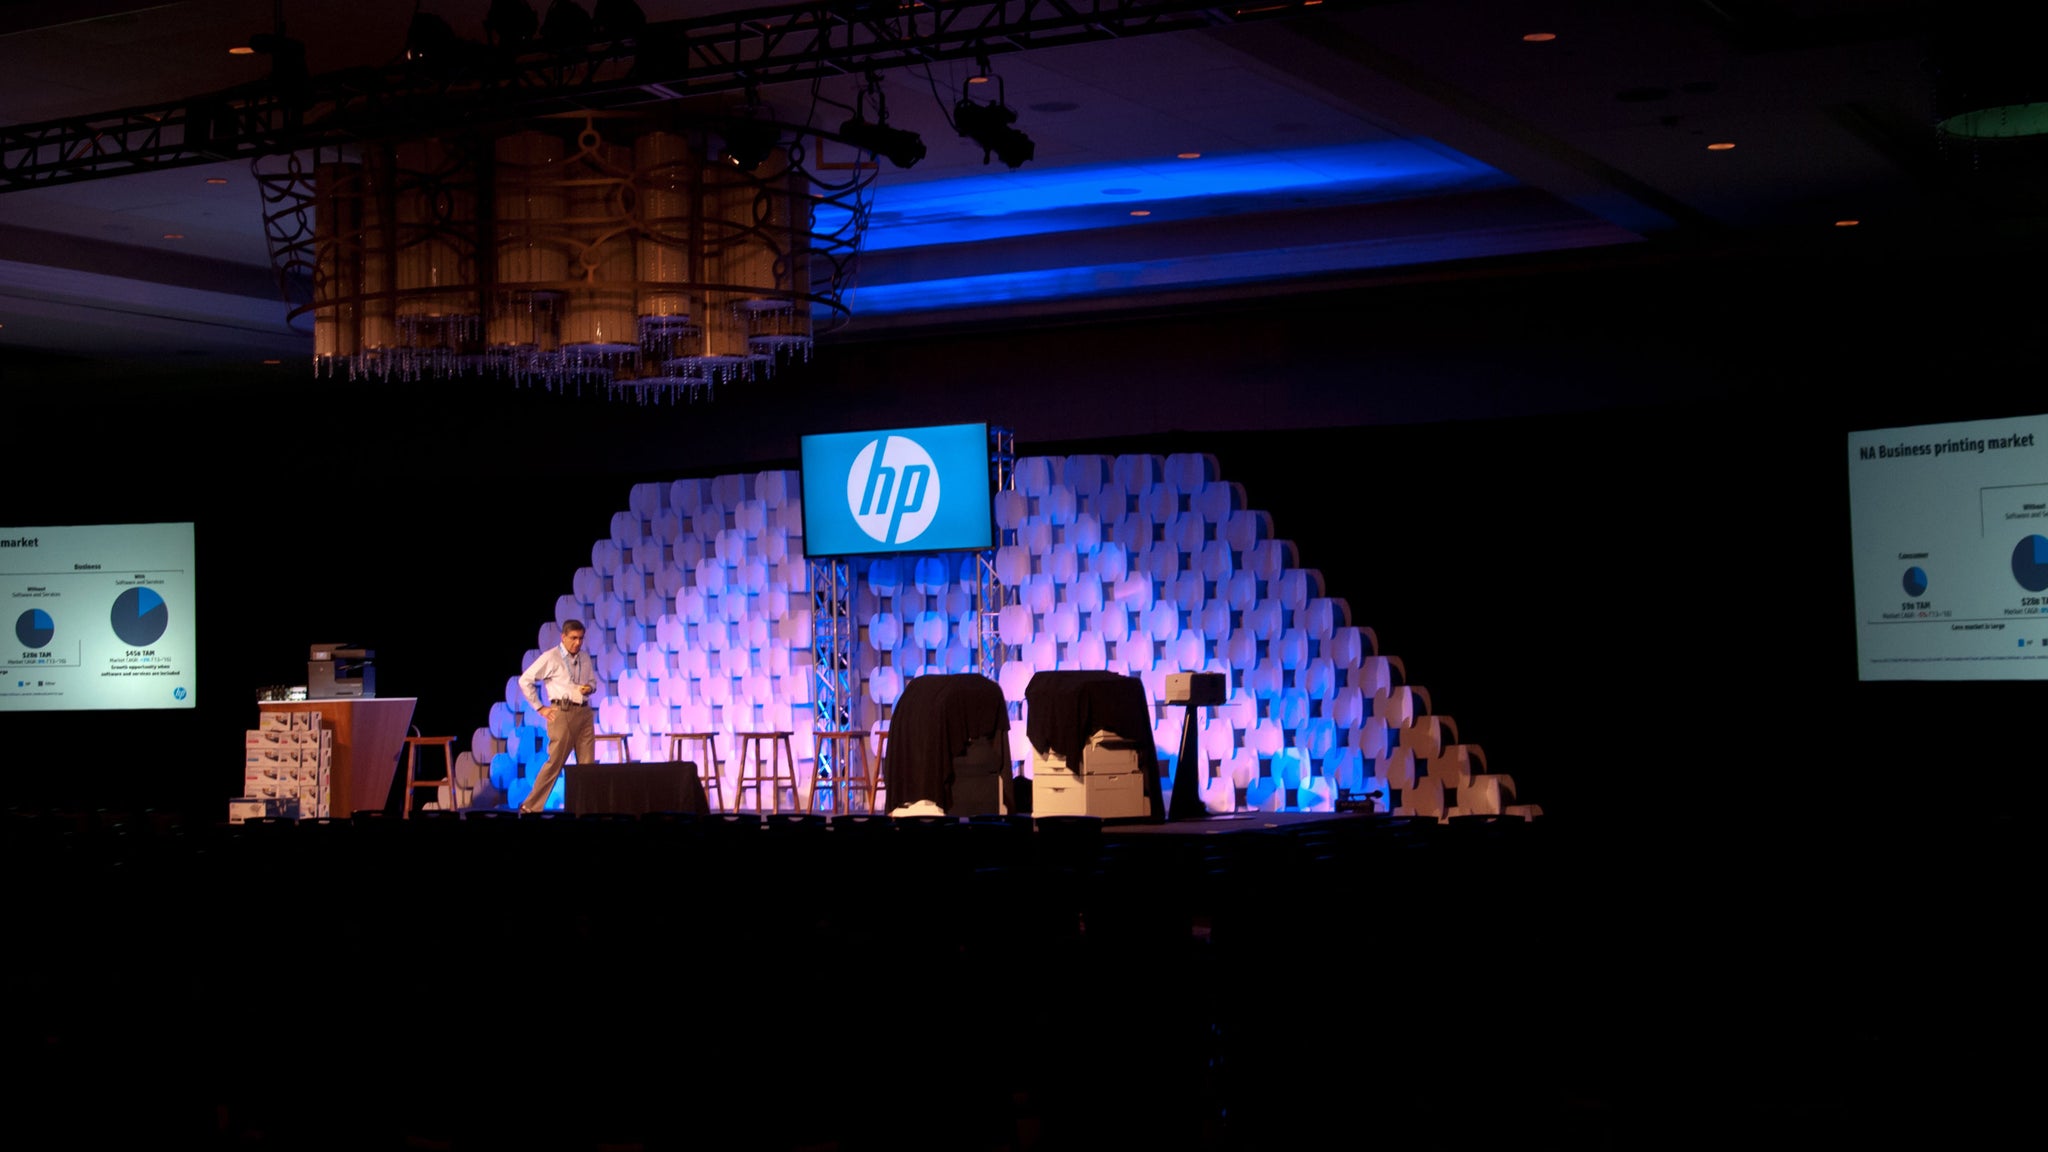 Nomad System pyramid wall as backdrop for HP event.